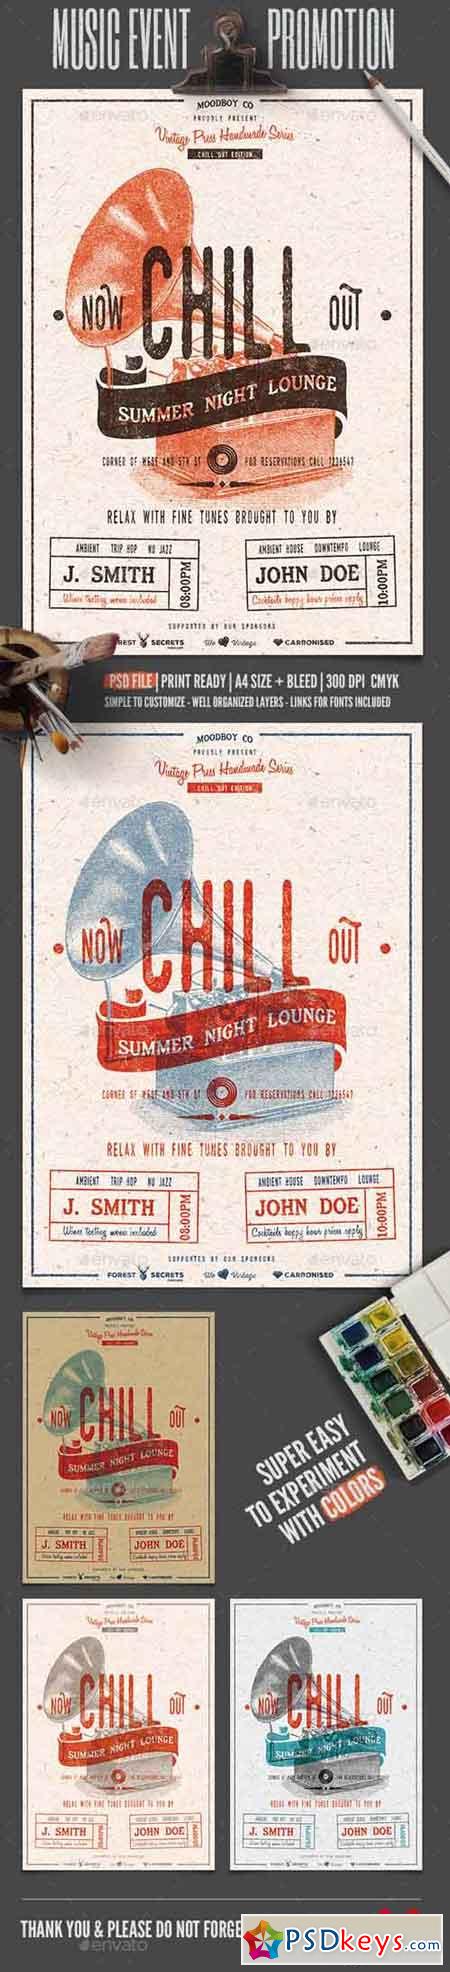 Chill Out - Lounge Flyer Poster 11906839